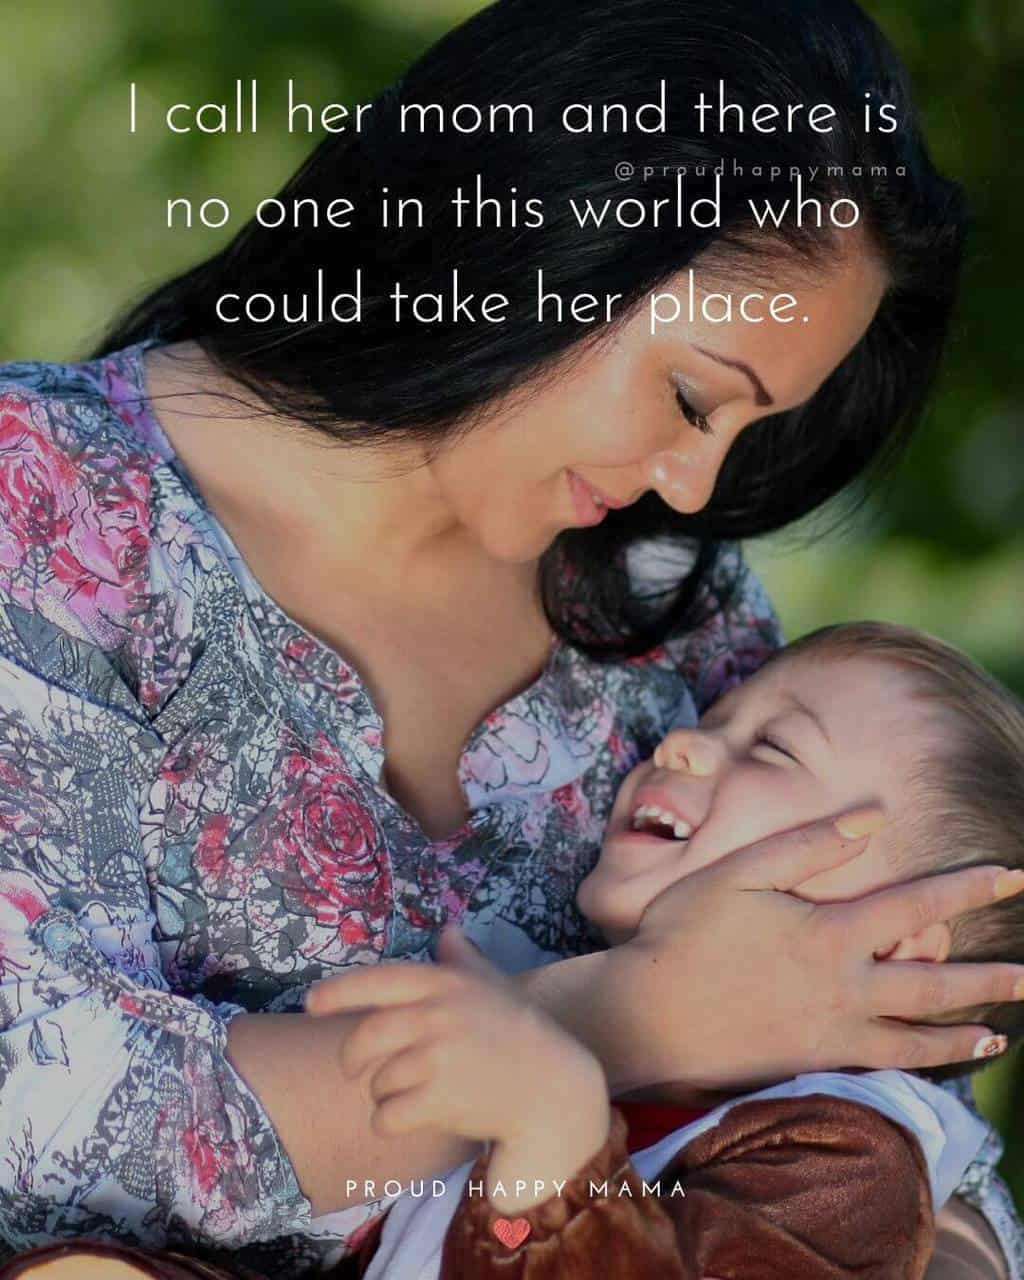 Cute Mothers Day Quotes | I call her mom and there is no one in this world who could take her place.